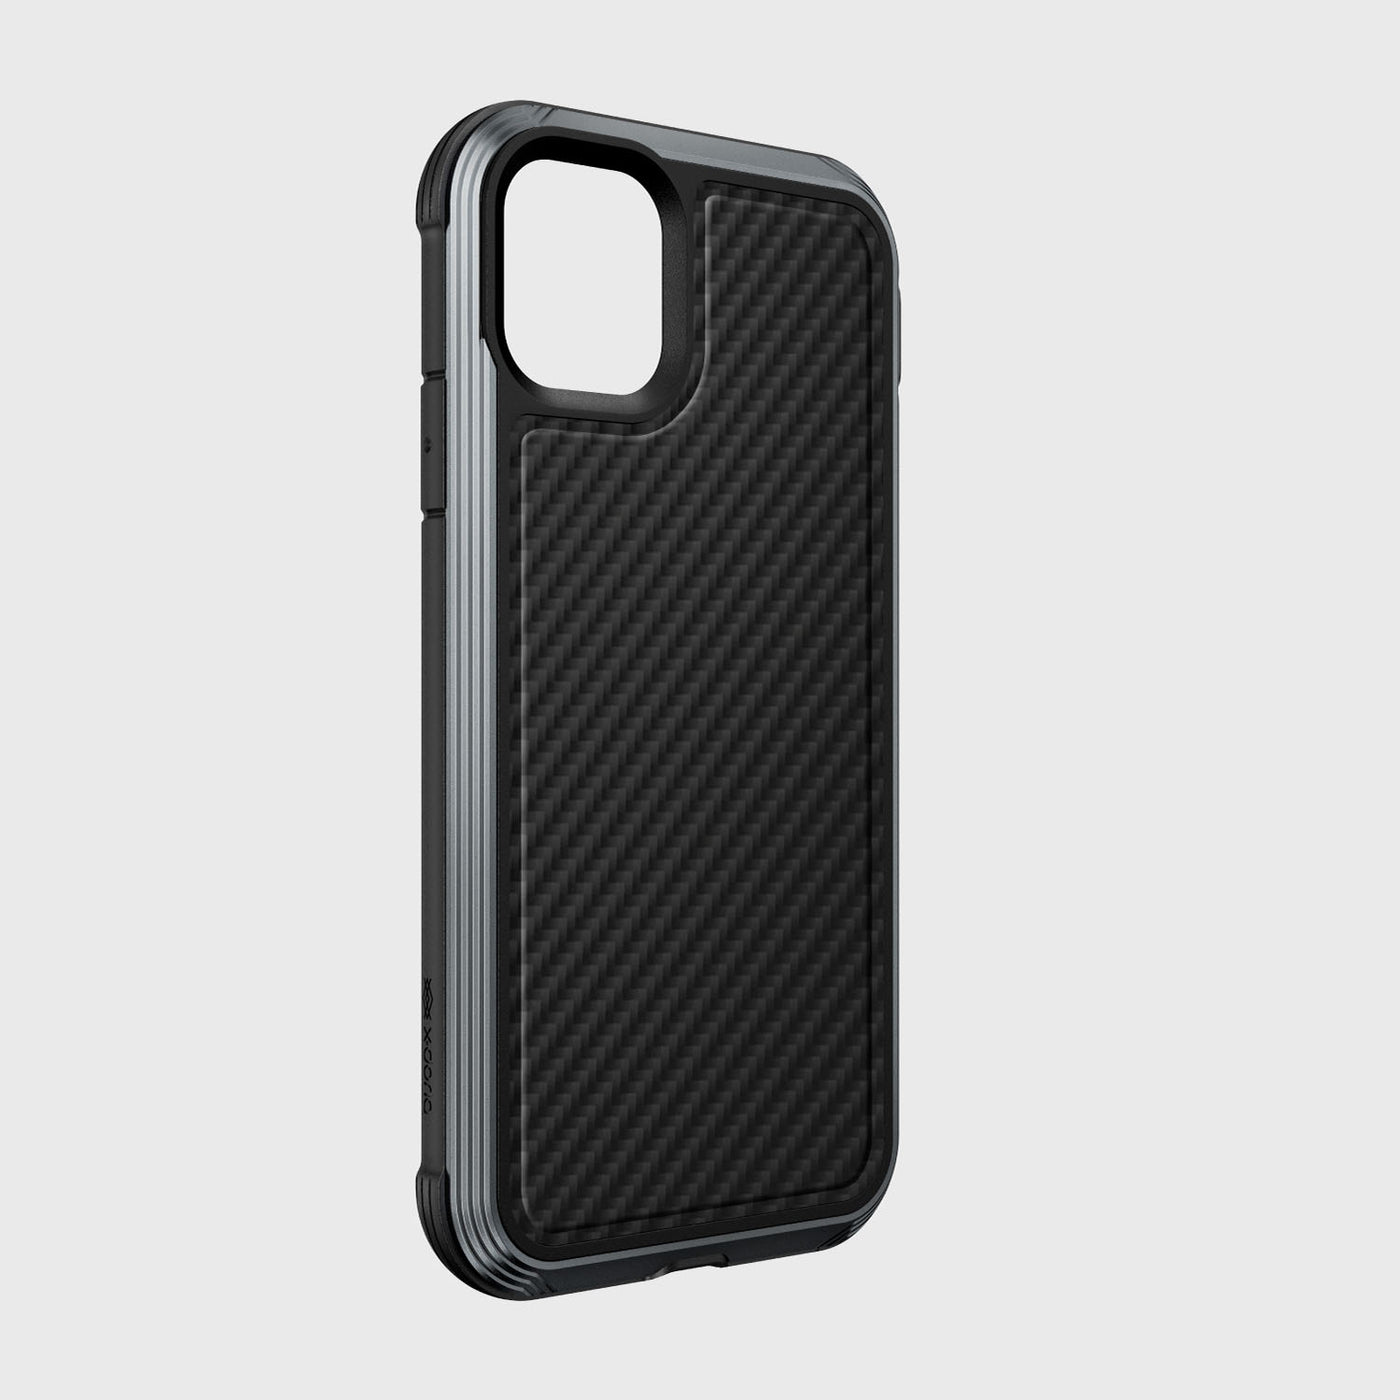 Luxurious Case for iPhone 11. Raptic Lux in black carbon fiber.